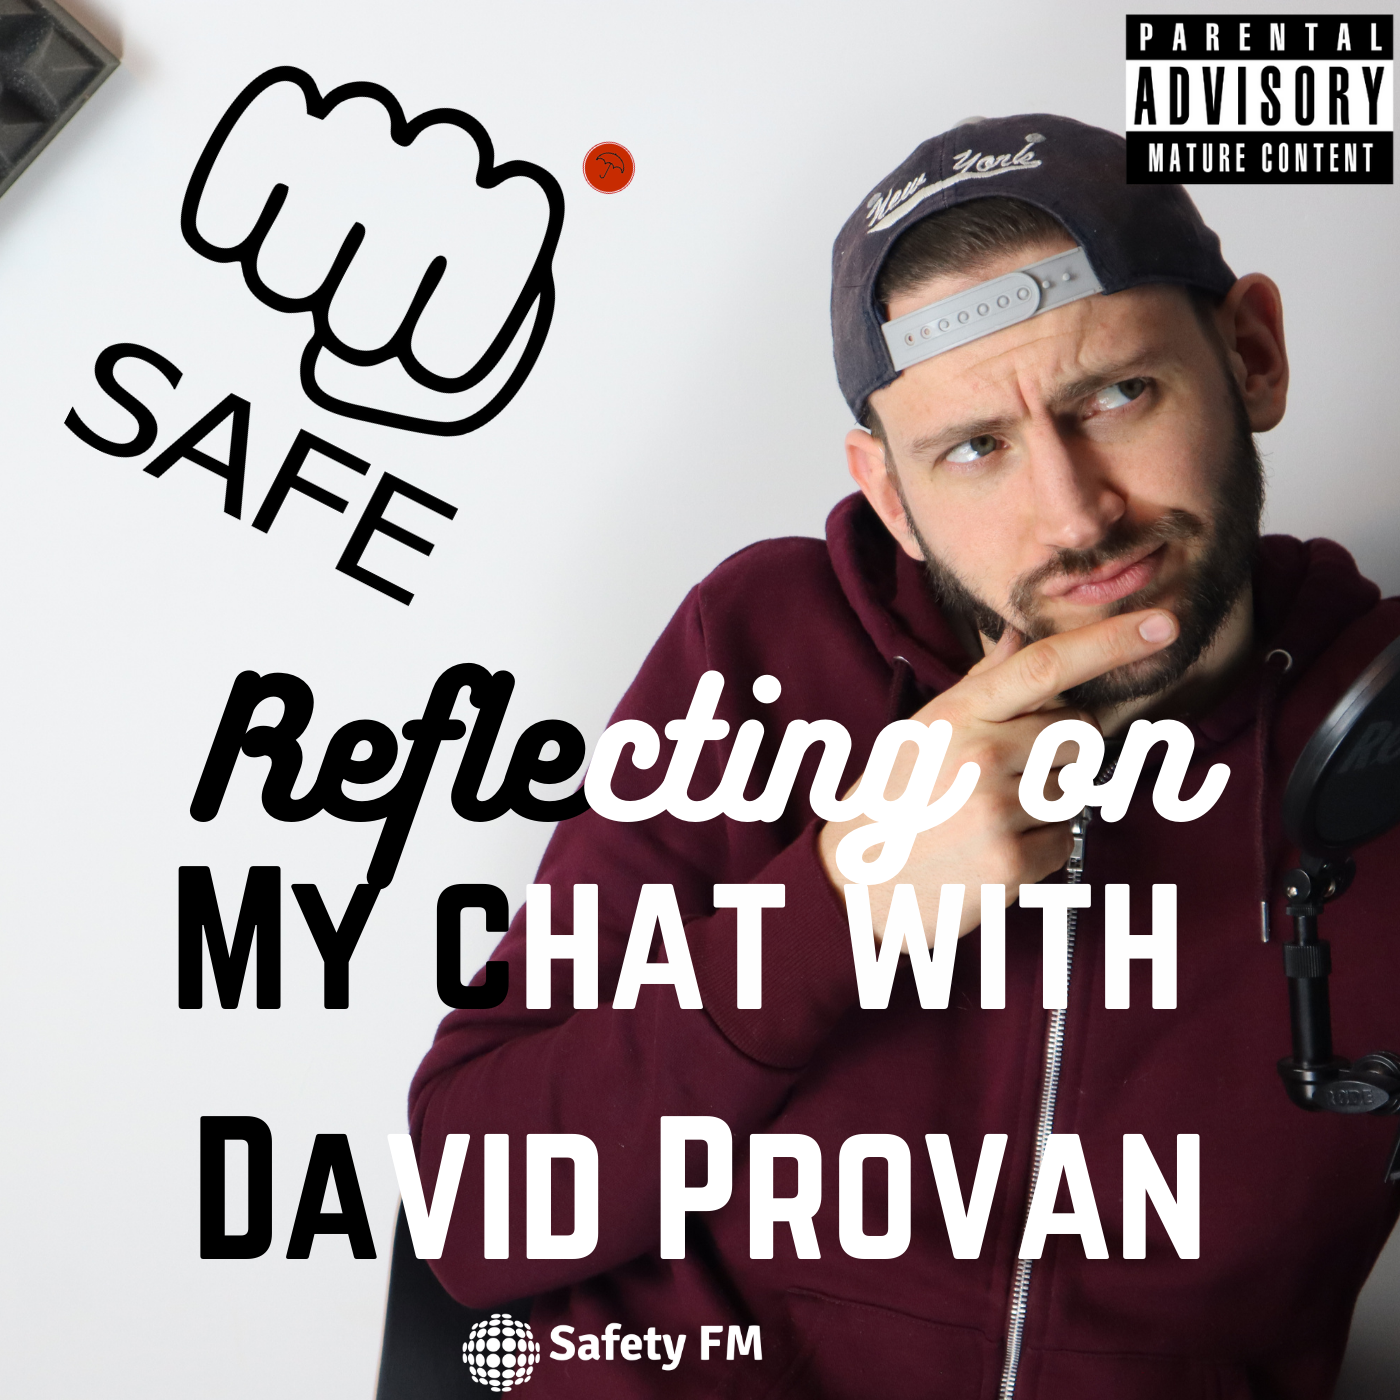 Reflecting on my chat with David Provan